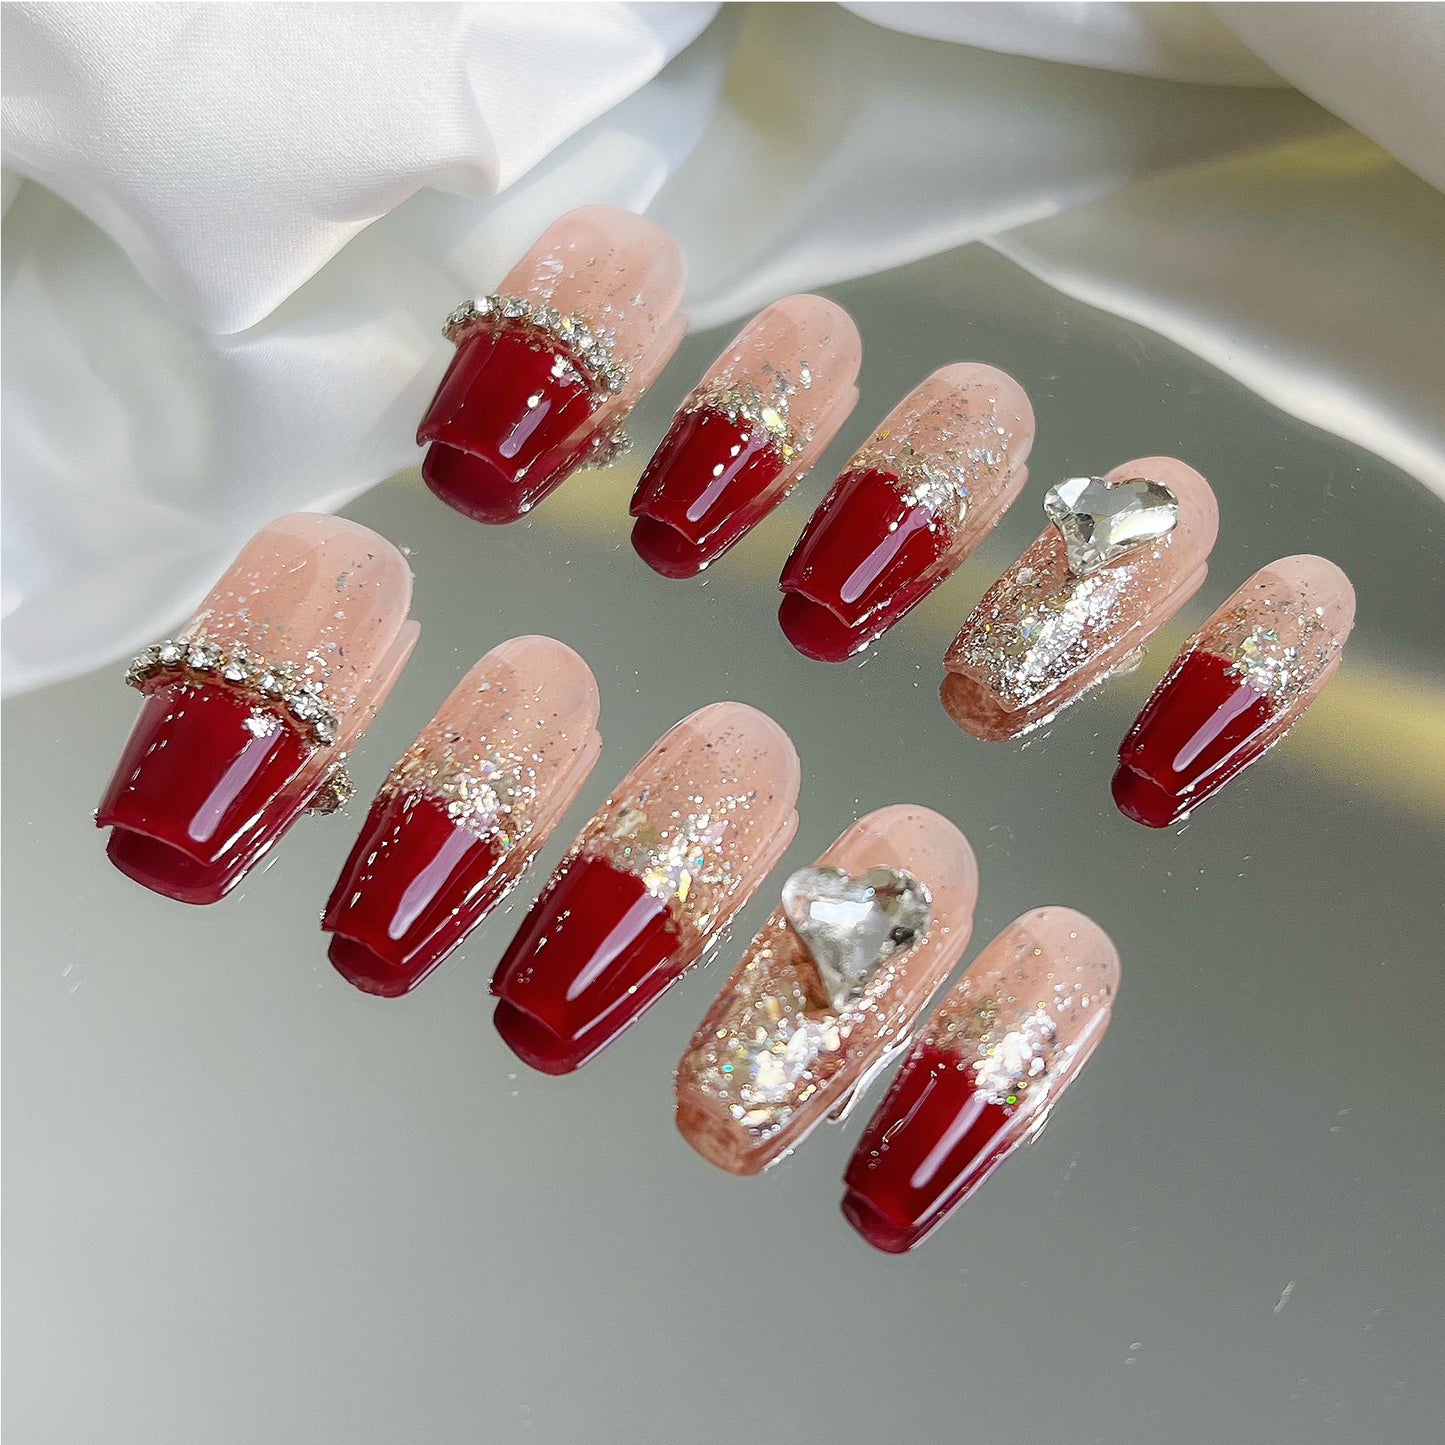 2023 New Year's Red Handmade Net Red Wearing Armor New Flash Autumn and Winter Advanced Feel New Year's Customized Finished Nail Enhancement